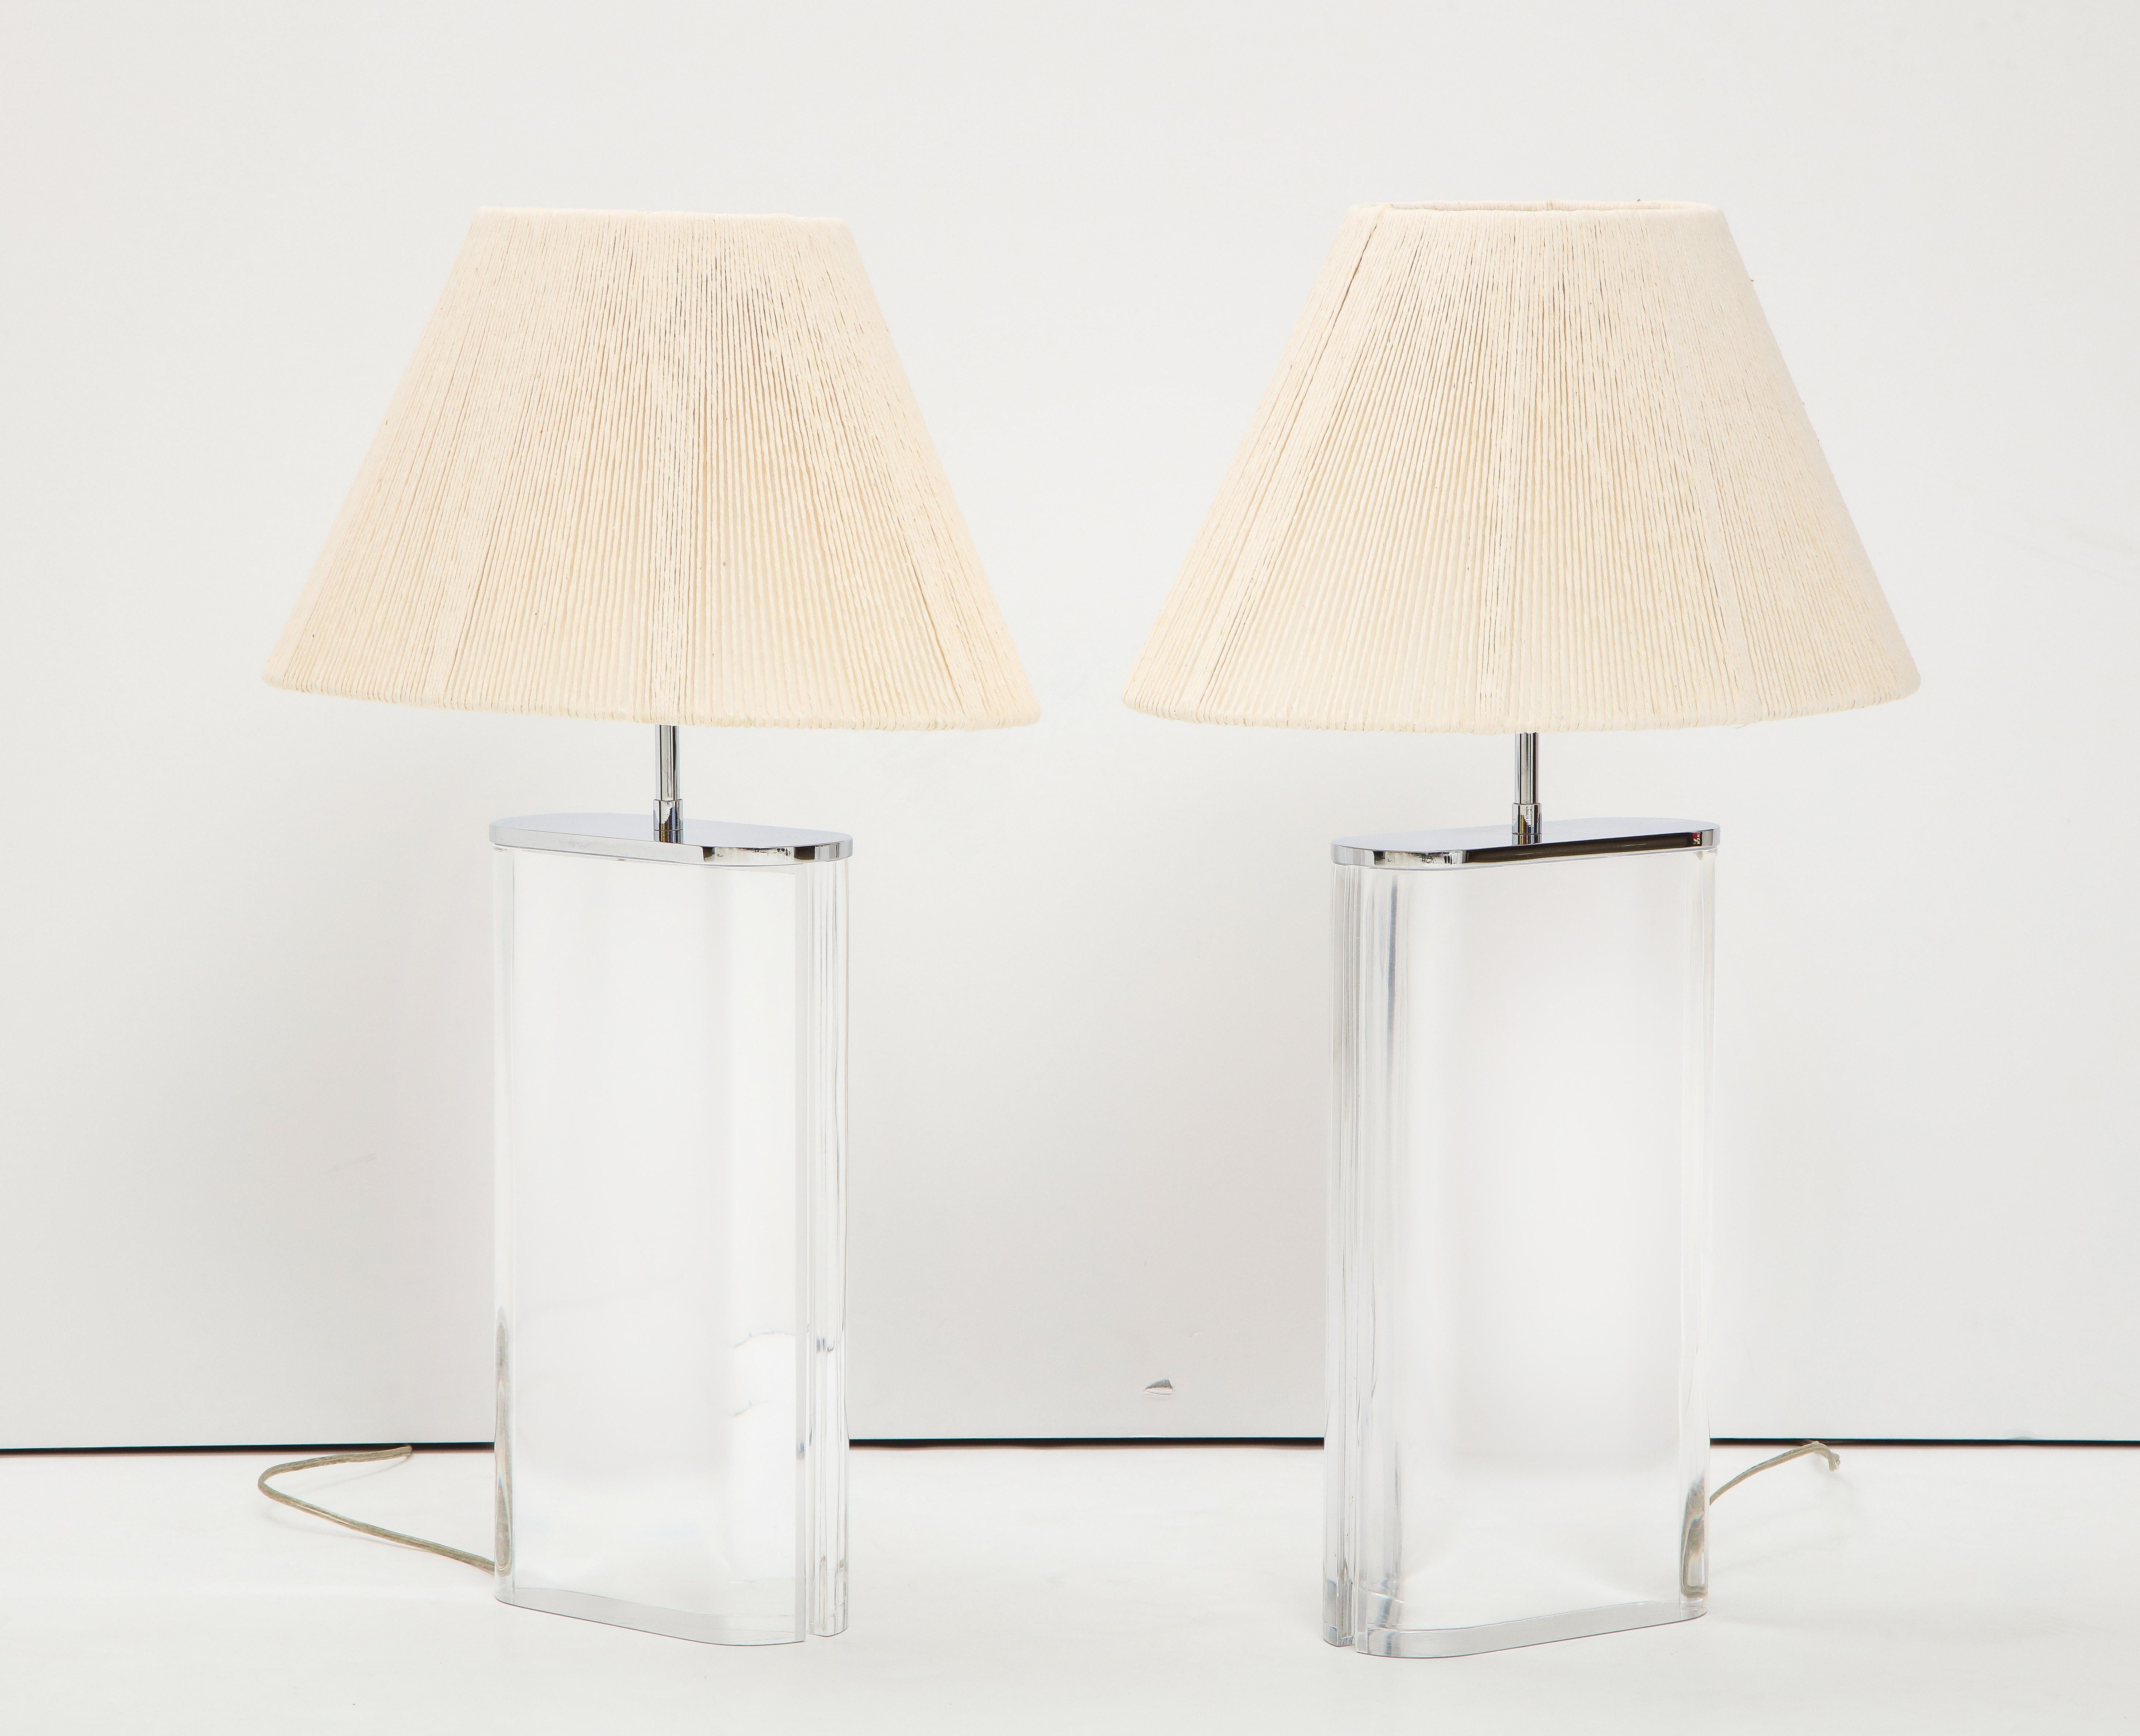 A large scale pair of Lucite and chrome mounted oblong form table lamps by Karl Springer. Purchased from Karl Springer circa 1982-1984, with custom made spring shades. Adjustable height.

Measures: Lucite base 16 3/8” H x 9” W x 3 ½” D
 
Overall